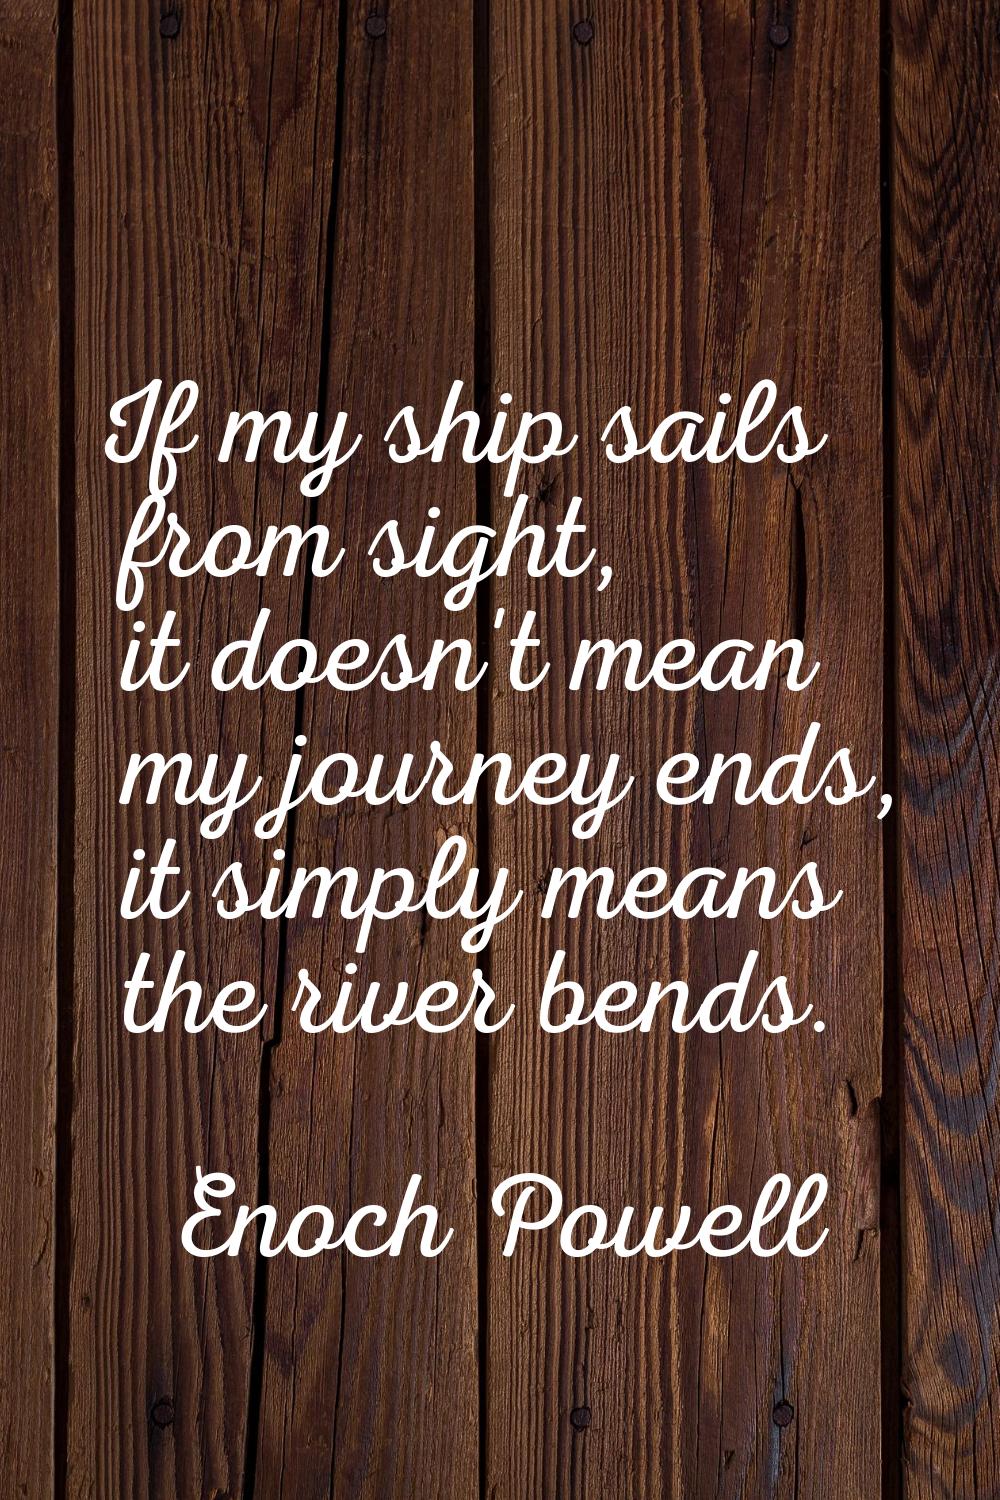 If my ship sails from sight, it doesn't mean my journey ends, it simply means the river bends.